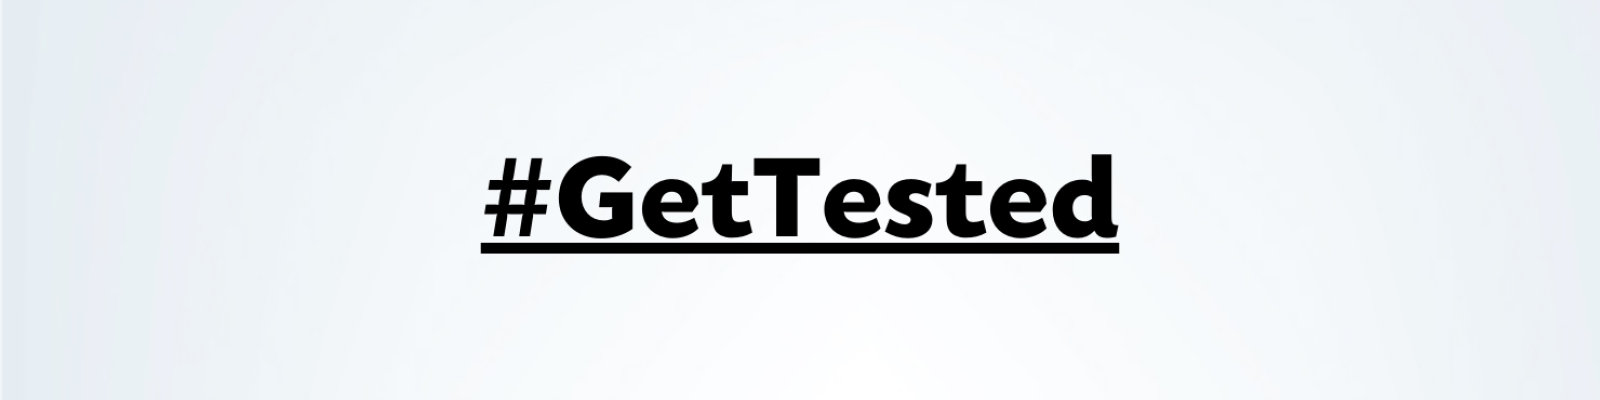 Gettested